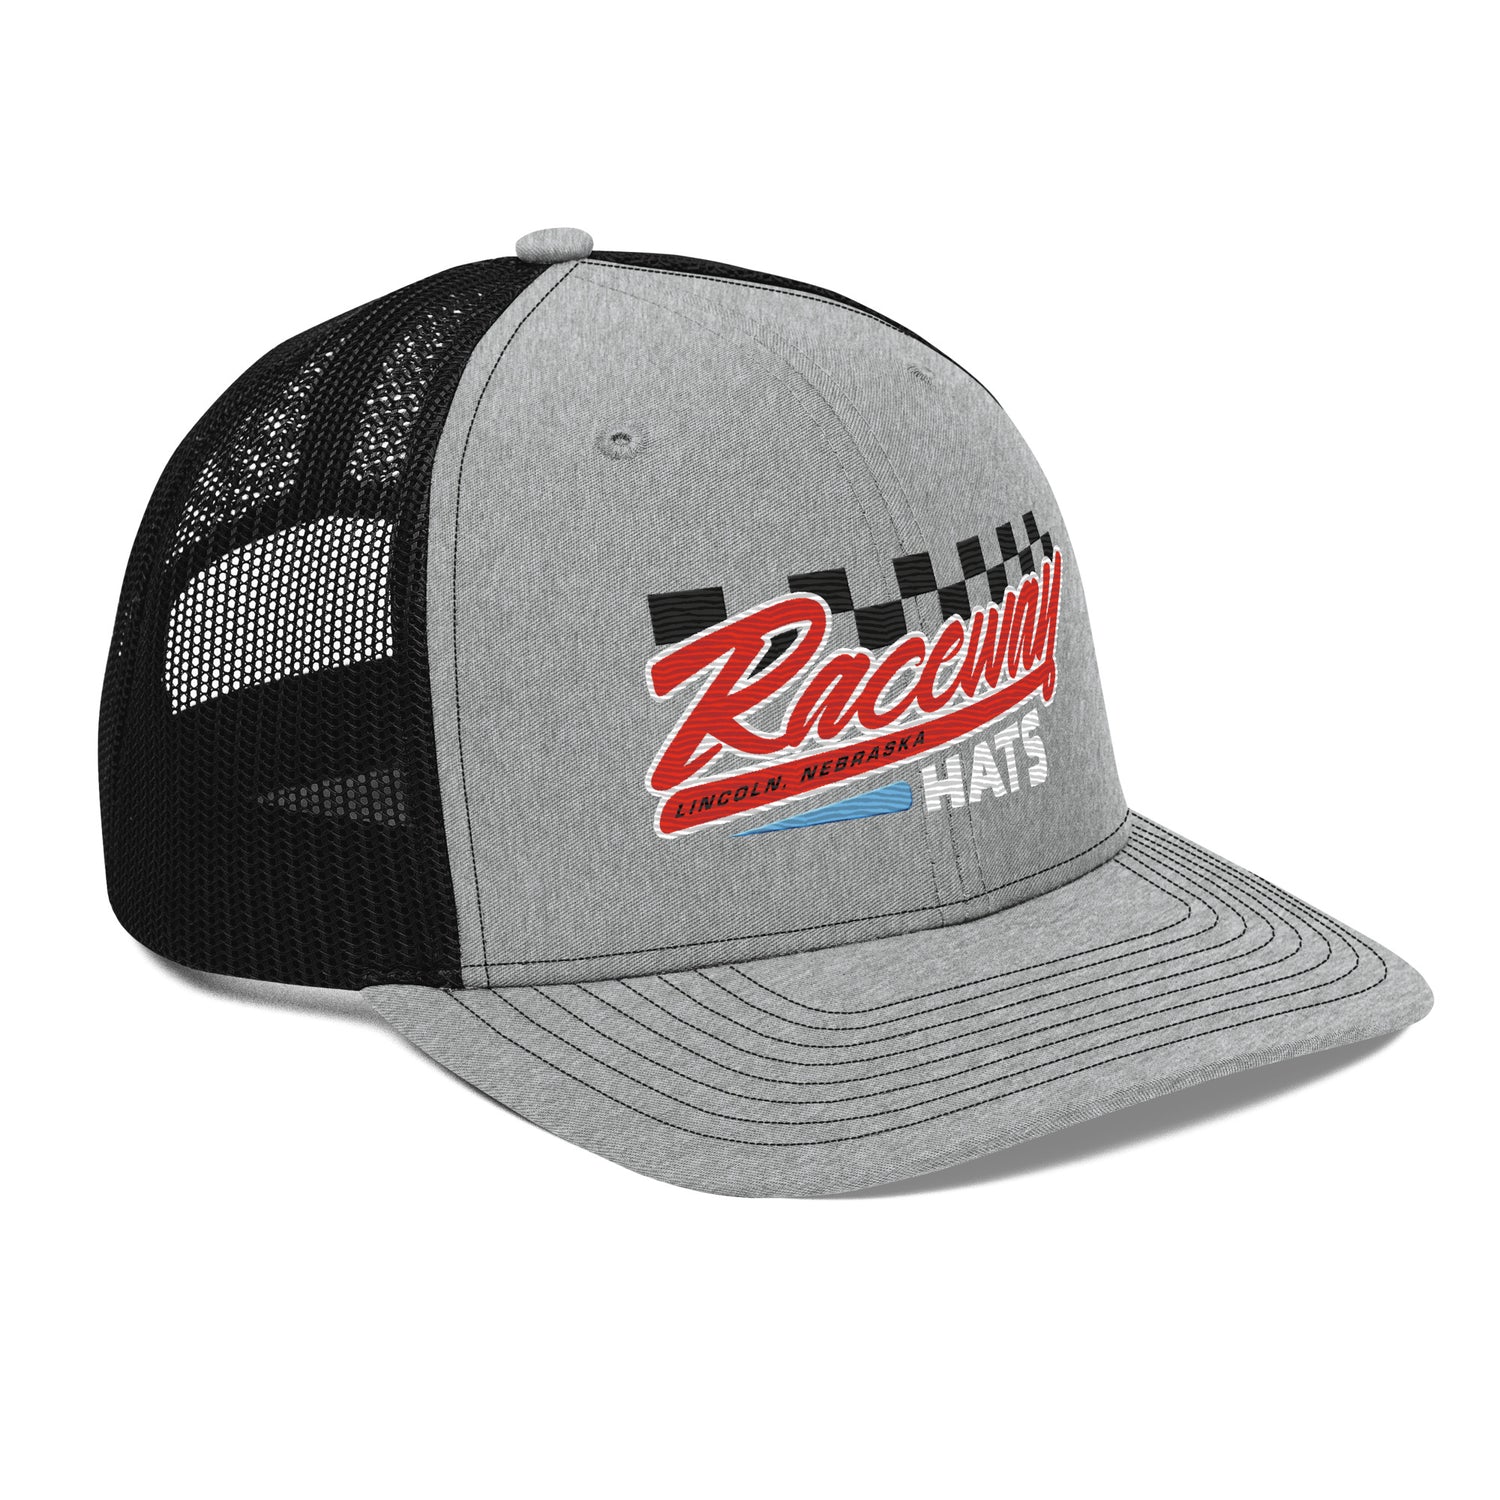 Custom Embroidered Hats | Vintage Embroidered Patches | Raceway Hats ...